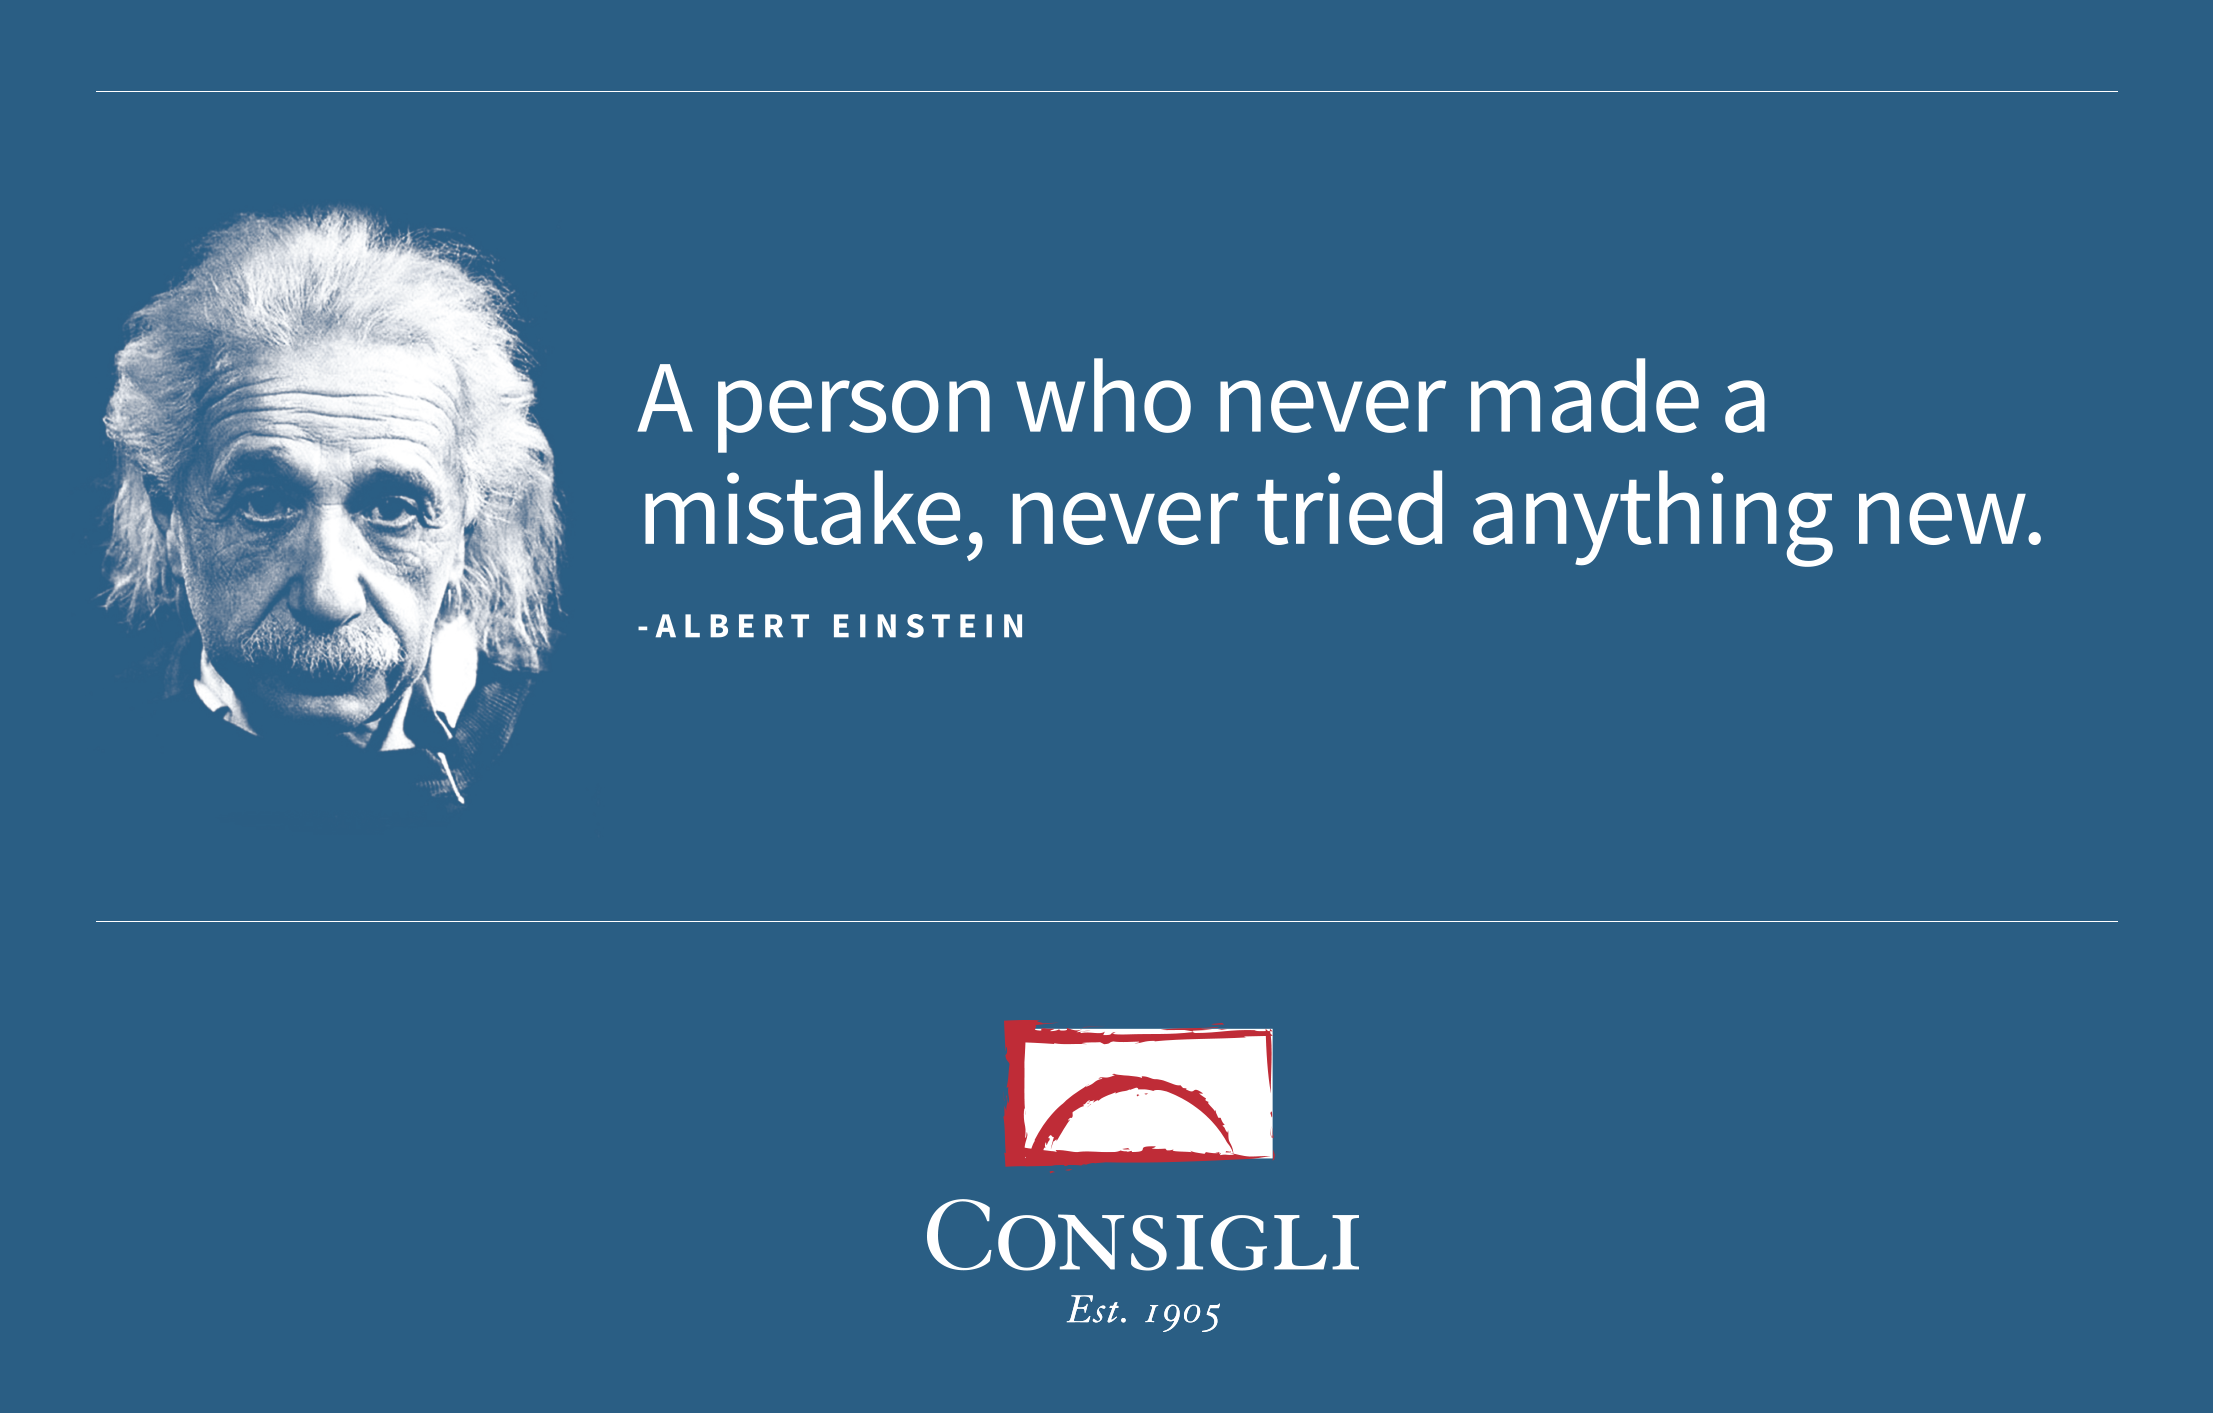 Albert Einstein portrait next to quote: "A person who never made a mistake, never tried anything new." Consigli est. 1905 logo at bottom